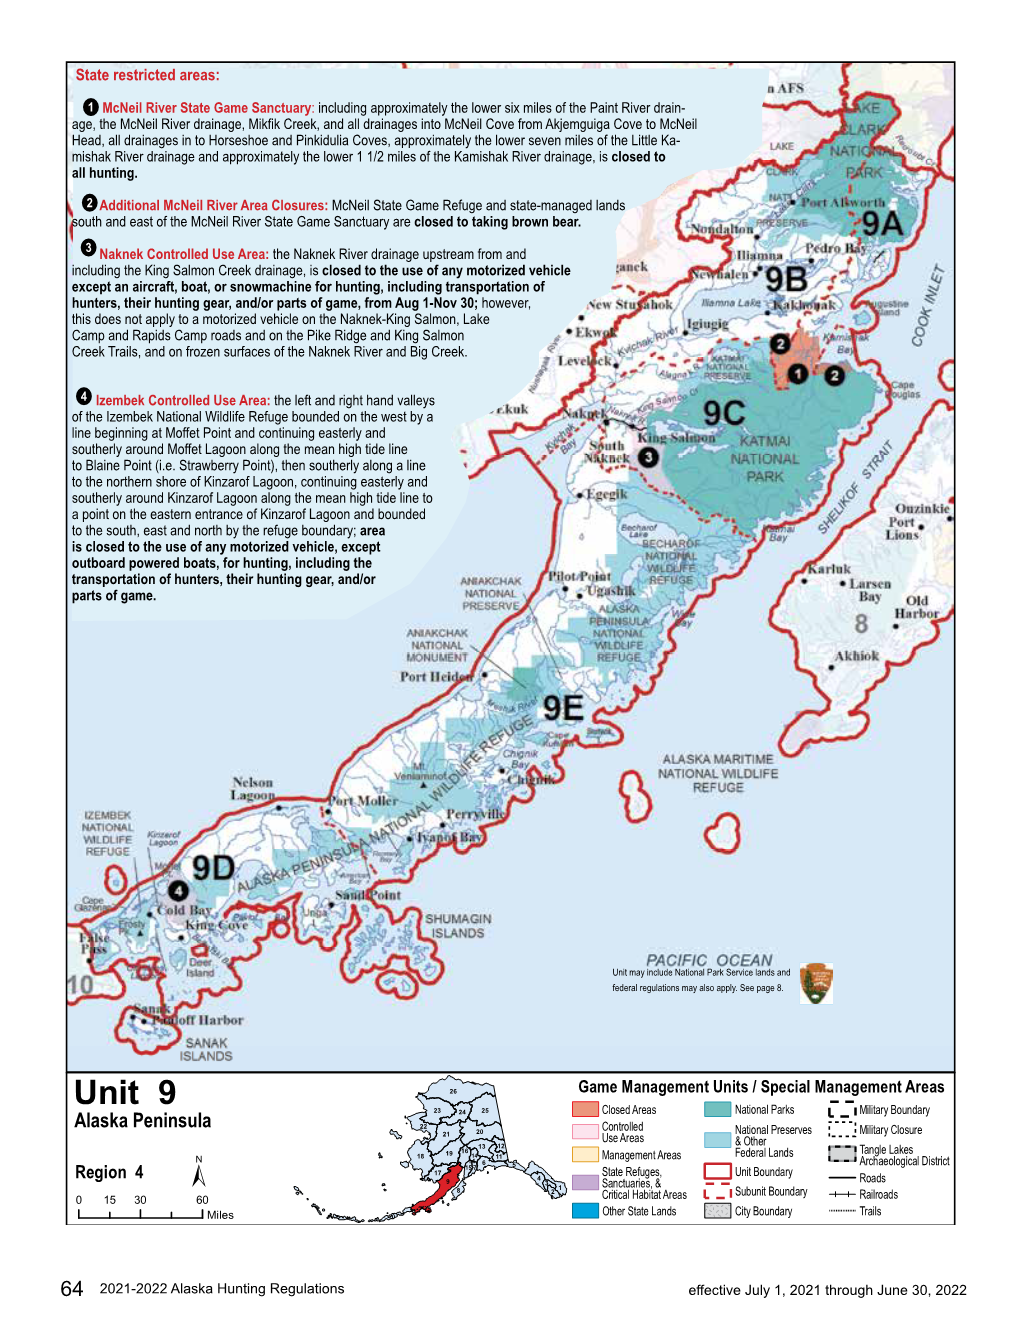 2021-2022 Alaska Hunting Regulations Effective July 1, 2021 Through June 30, 2022 Unit 9 Alaska Peninsula See Map on Page 64 for State Restricted Areas in Unit 9